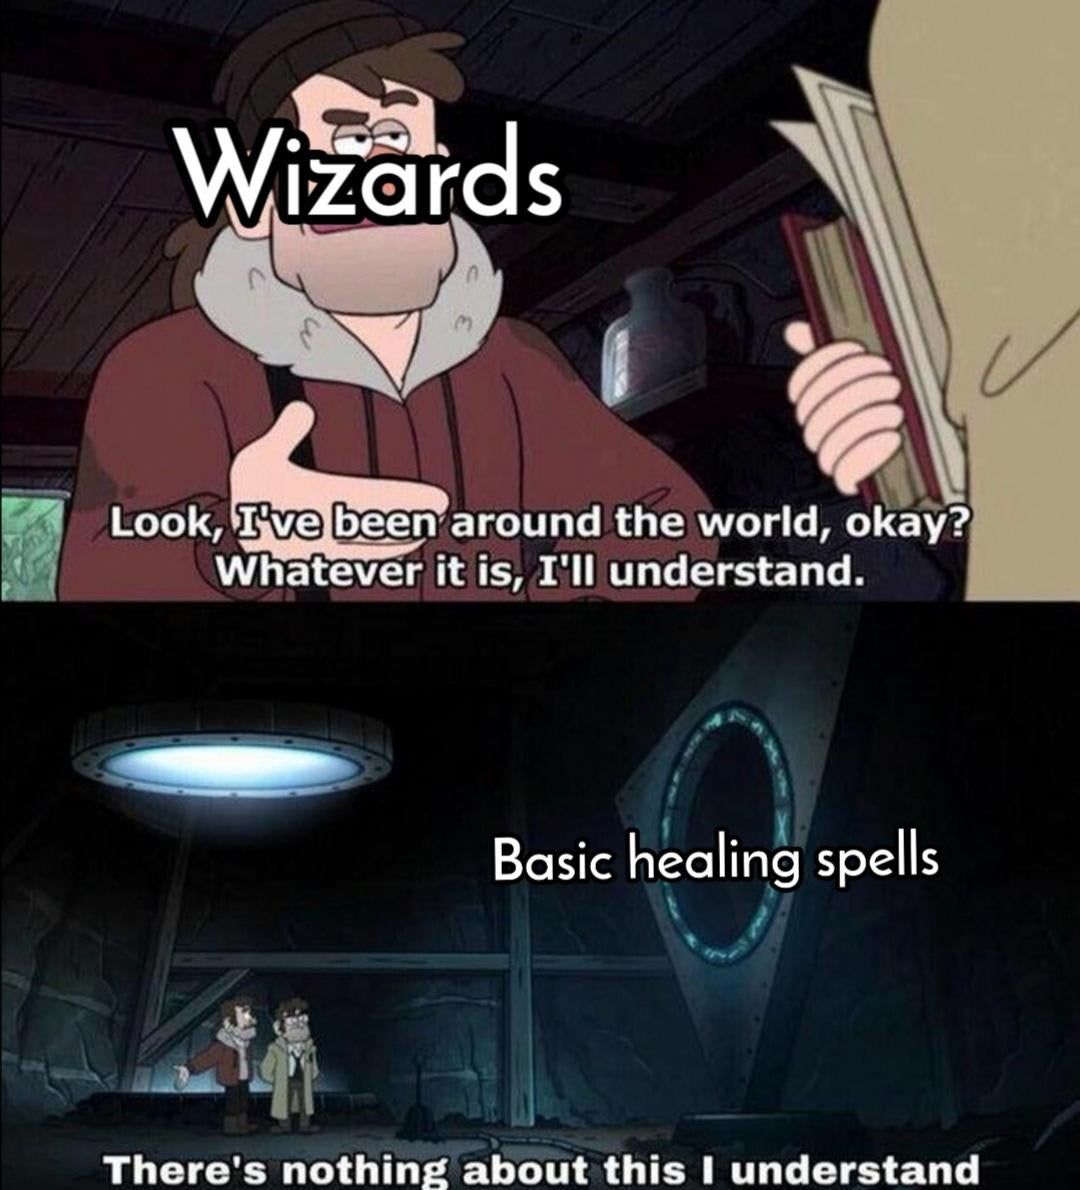 Wizards: "Look, I've been around the world, okay? Whatever it is, I'll understand." *Basic healing spells* "There's nothing about this I understand!"